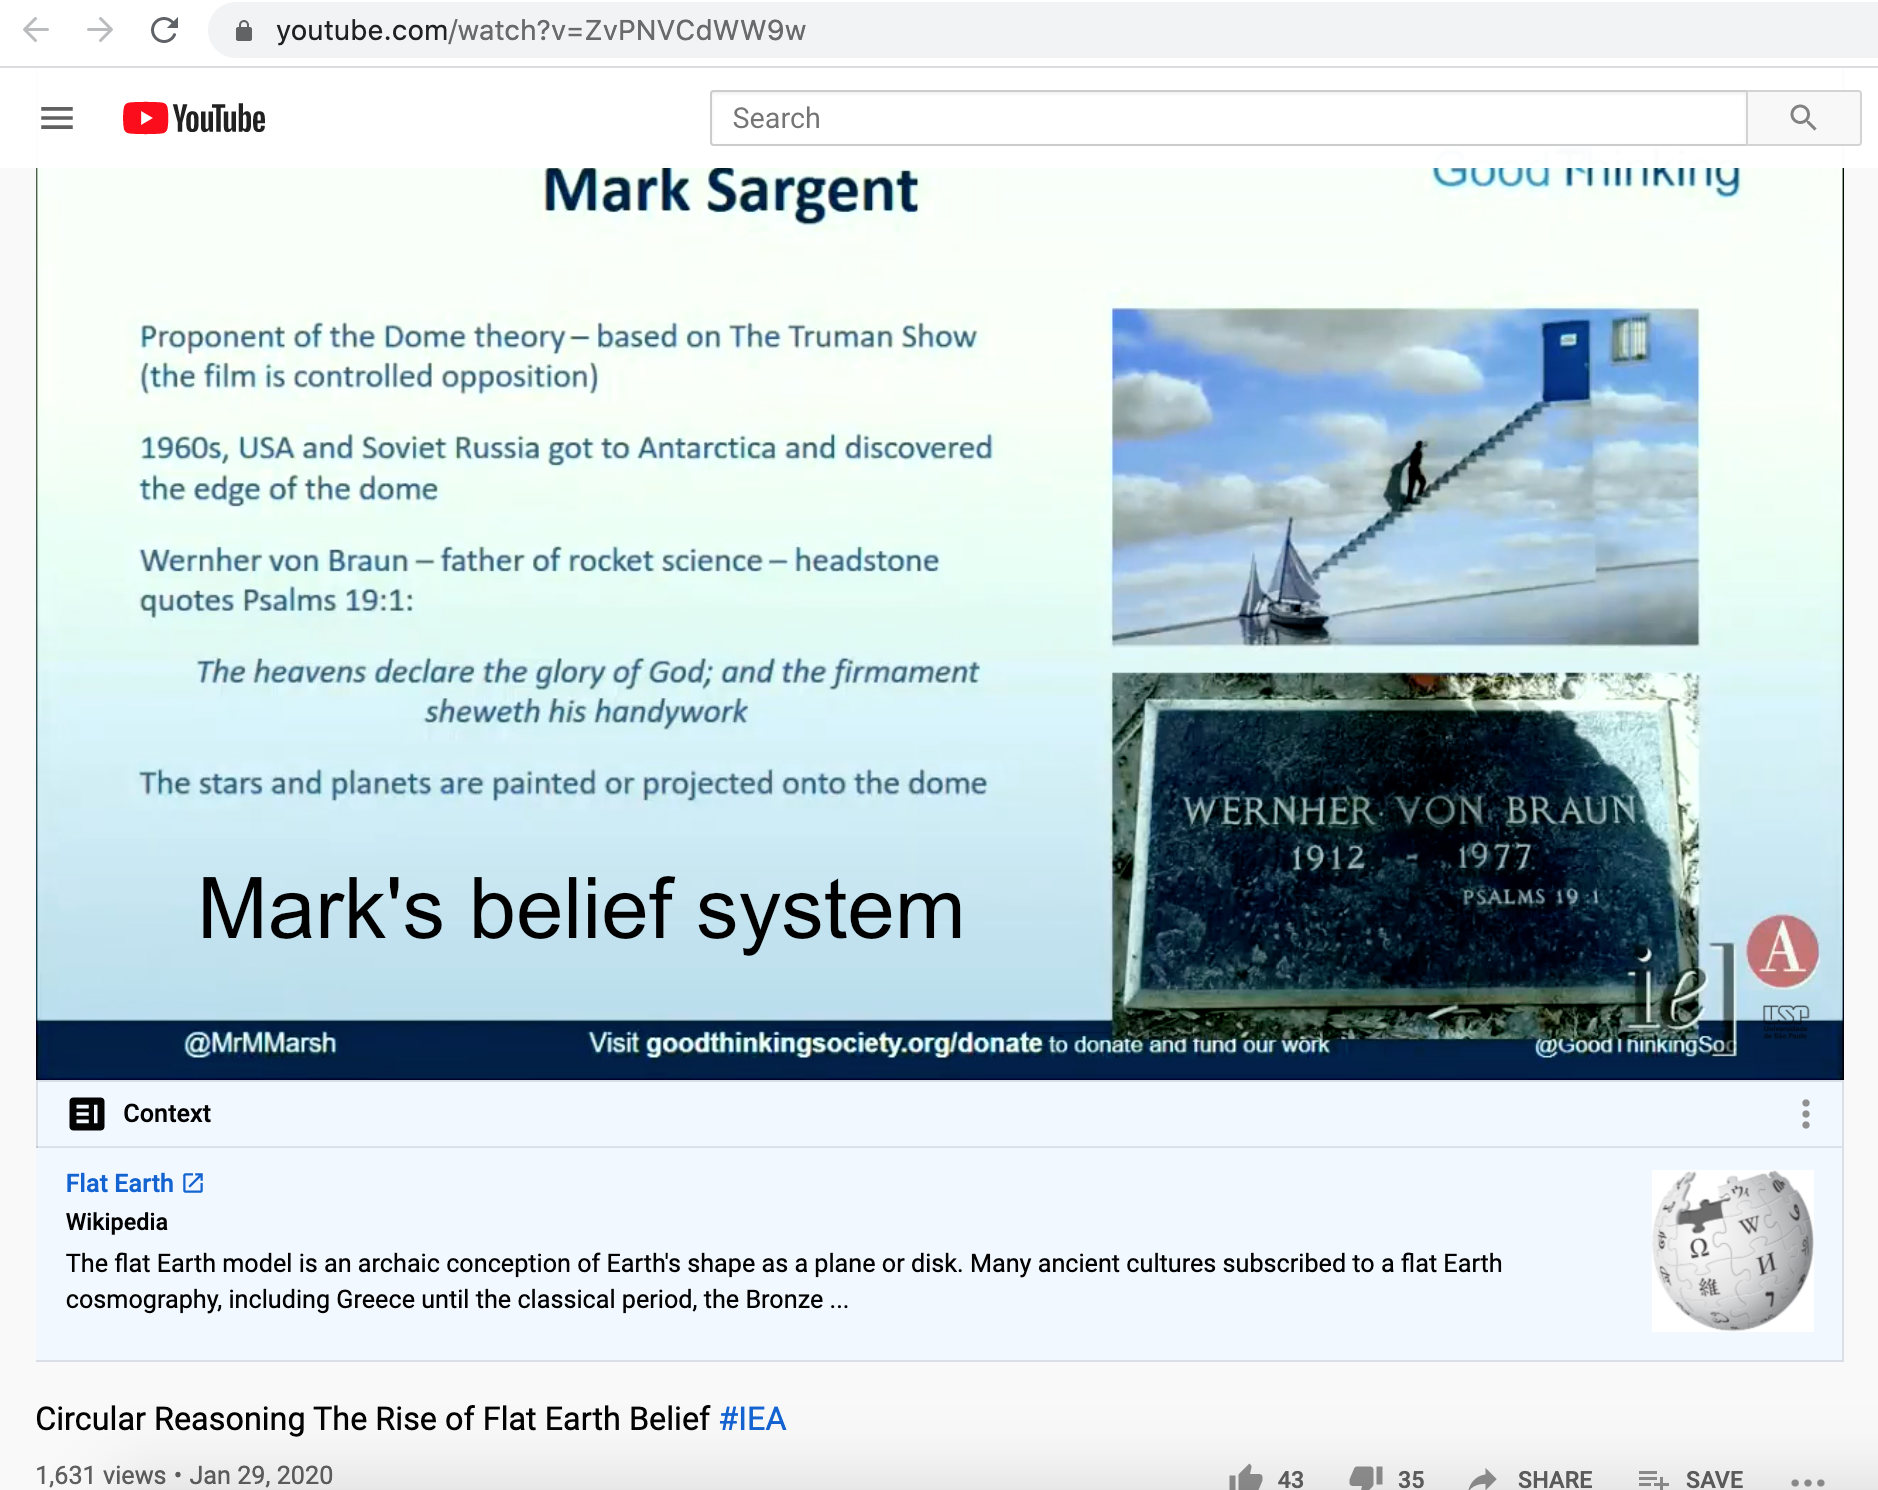 Mark Sargent's belief system about flat Earth.jpg